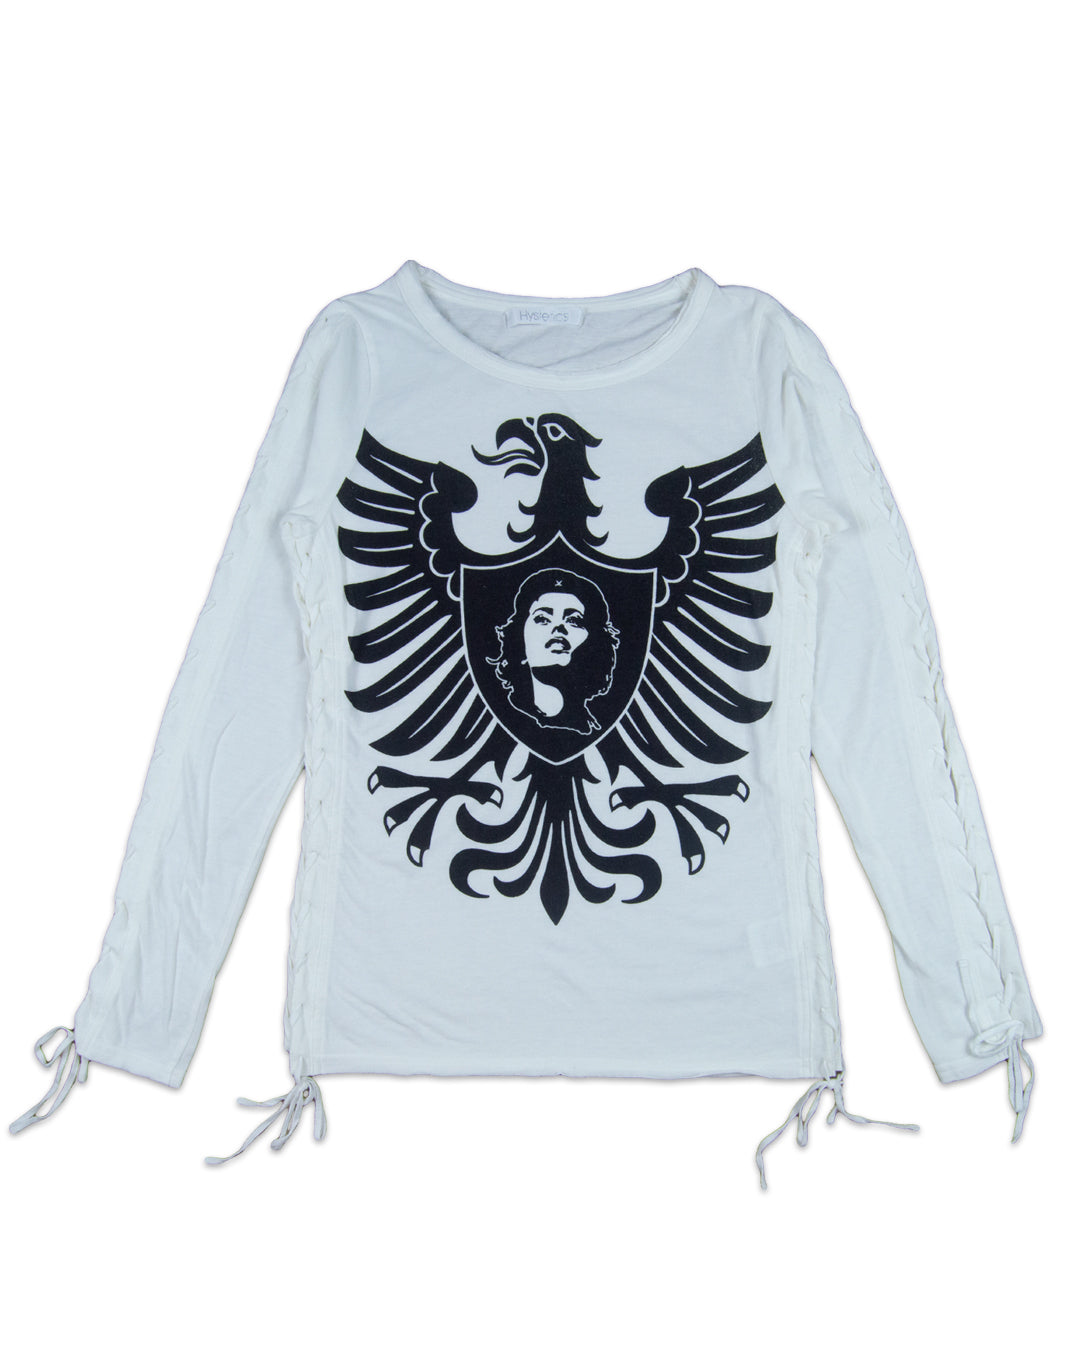 Hysteric Glamour Insignia Lace Up Long Sleeve Tee